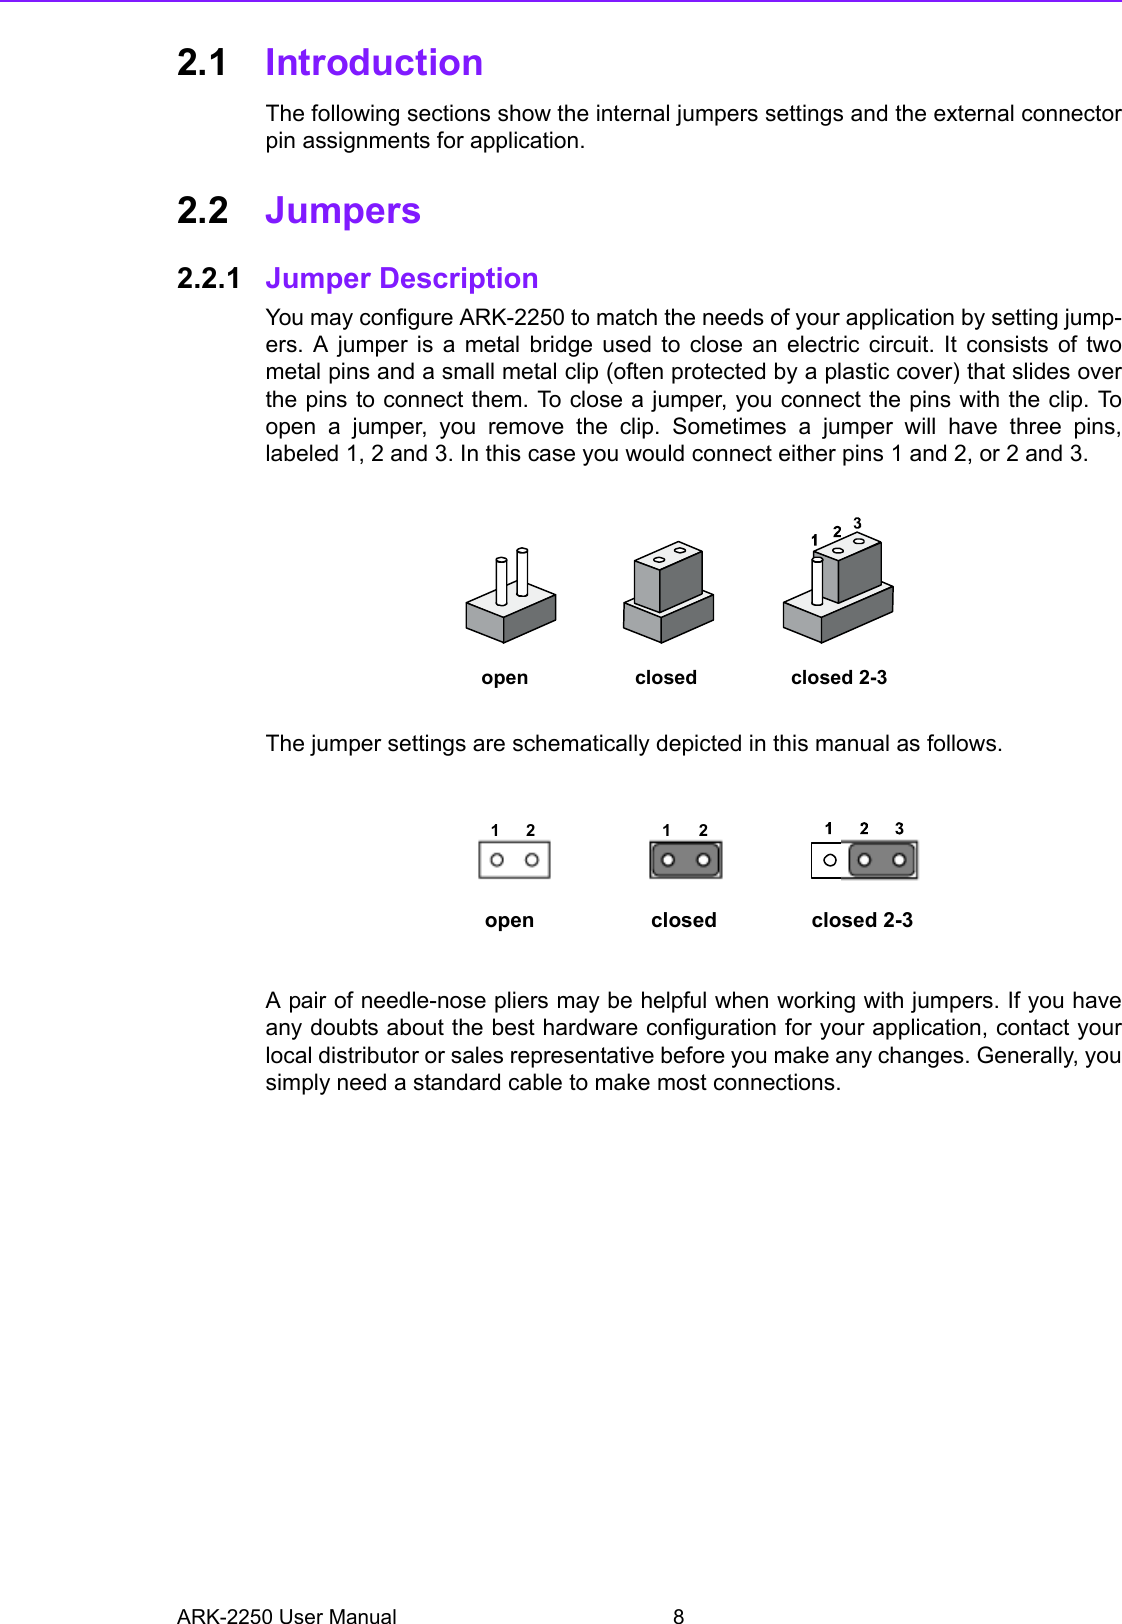 ARK-2250 User Manual 82.1 IntroductionThe following sections show the internal jumpers settings and the external connectorpin assignments for application.2.2 Jumpers 2.2.1 Jumper DescriptionYou may configure ARK-2250 to match the needs of your application by setting jump-ers. A jumper is a metal bridge used to close an electric circuit. It consists of twometal pins and a small metal clip (often protected by a plastic cover) that slides overthe pins to connect them. To close a jumper, you connect the pins with the clip. Toopen a jumper, you remove the clip. Sometimes a jumper will have three pins,labeled 1, 2 and 3. In this case you would connect either pins 1 and 2, or 2 and 3.The jumper settings are schematically depicted in this manual as follows.A pair of needle-nose pliers may be helpful when working with jumpers. If you haveany doubts about the best hardware configuration for your application, contact yourlocal distributor or sales representative before you make any changes. Generally, yousimply need a standard cable to make most connections. closed 2-3closedopen12 12closed 2-3closedopen